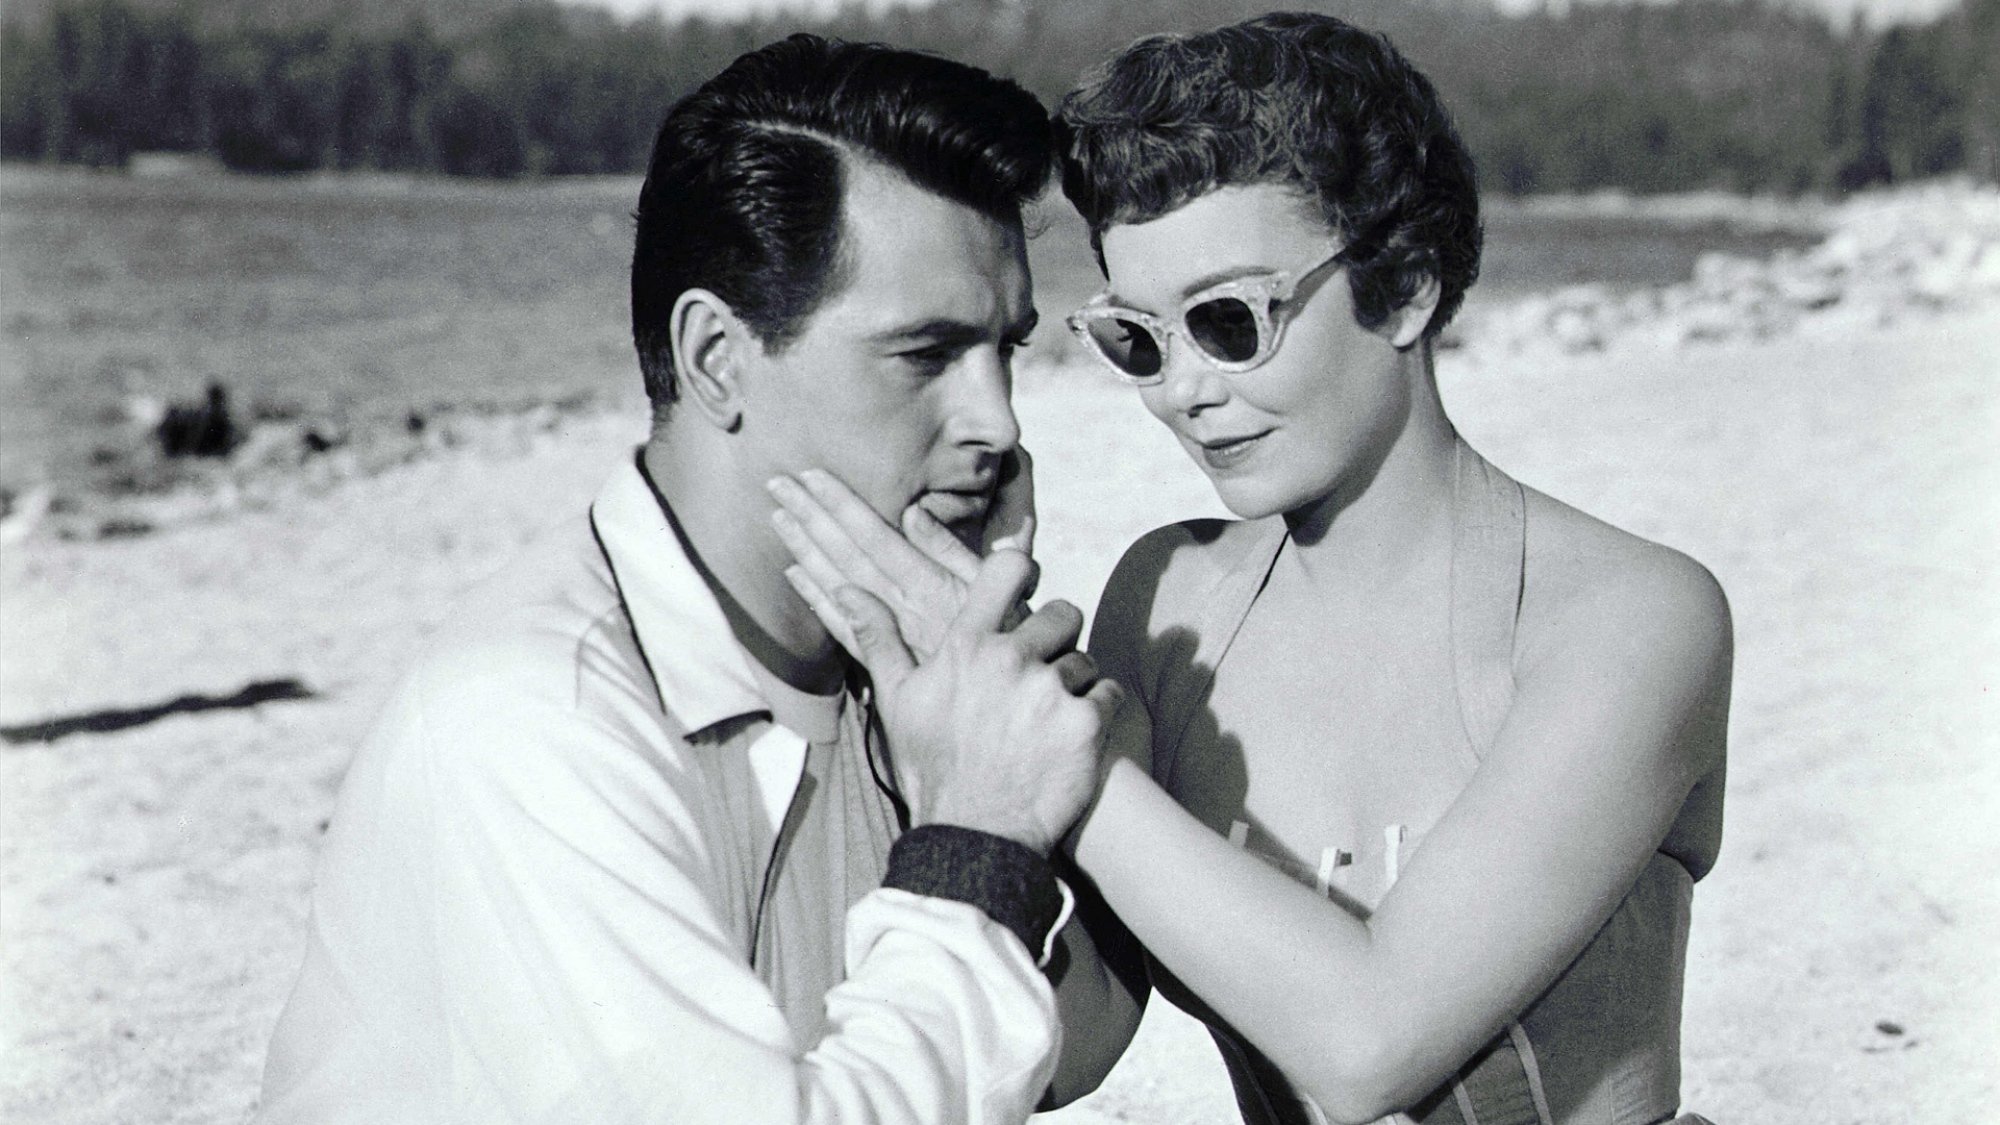 A dark-haired man and a woman with short, dark hair sit on the beach together; her hand is on his cheek.